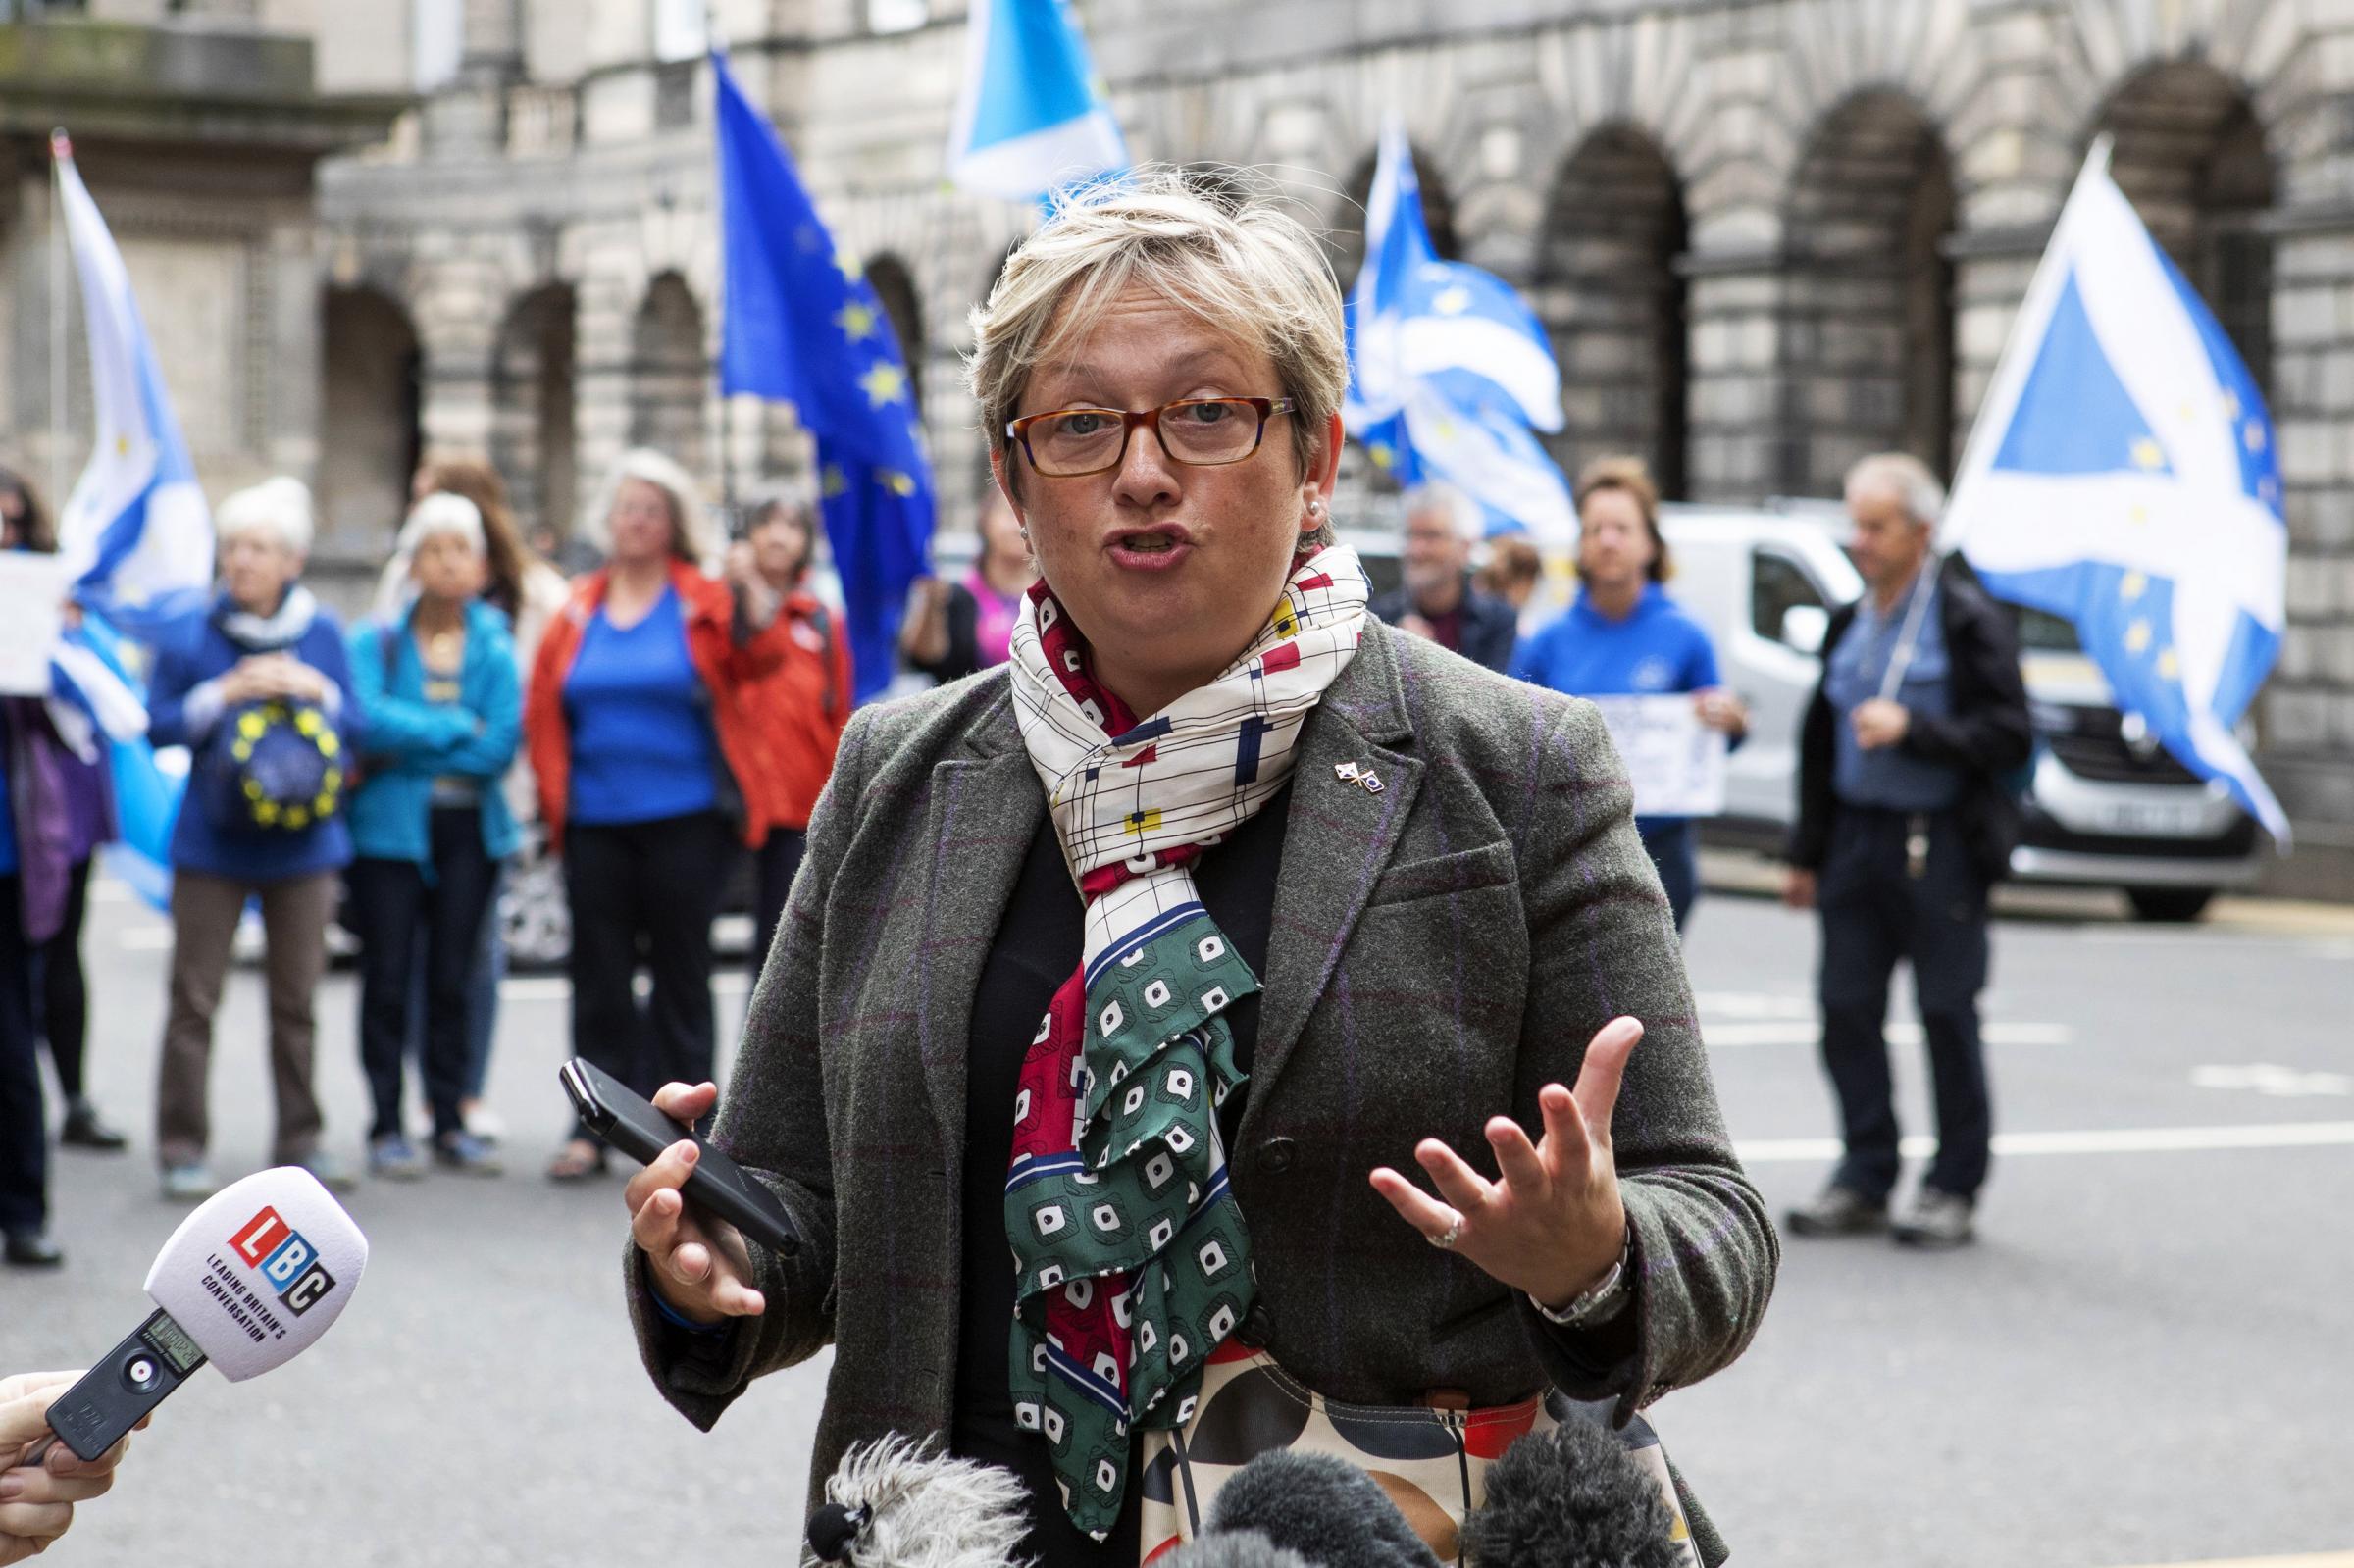 SNP MP Joanna Cherry says independence vote may not happen next year